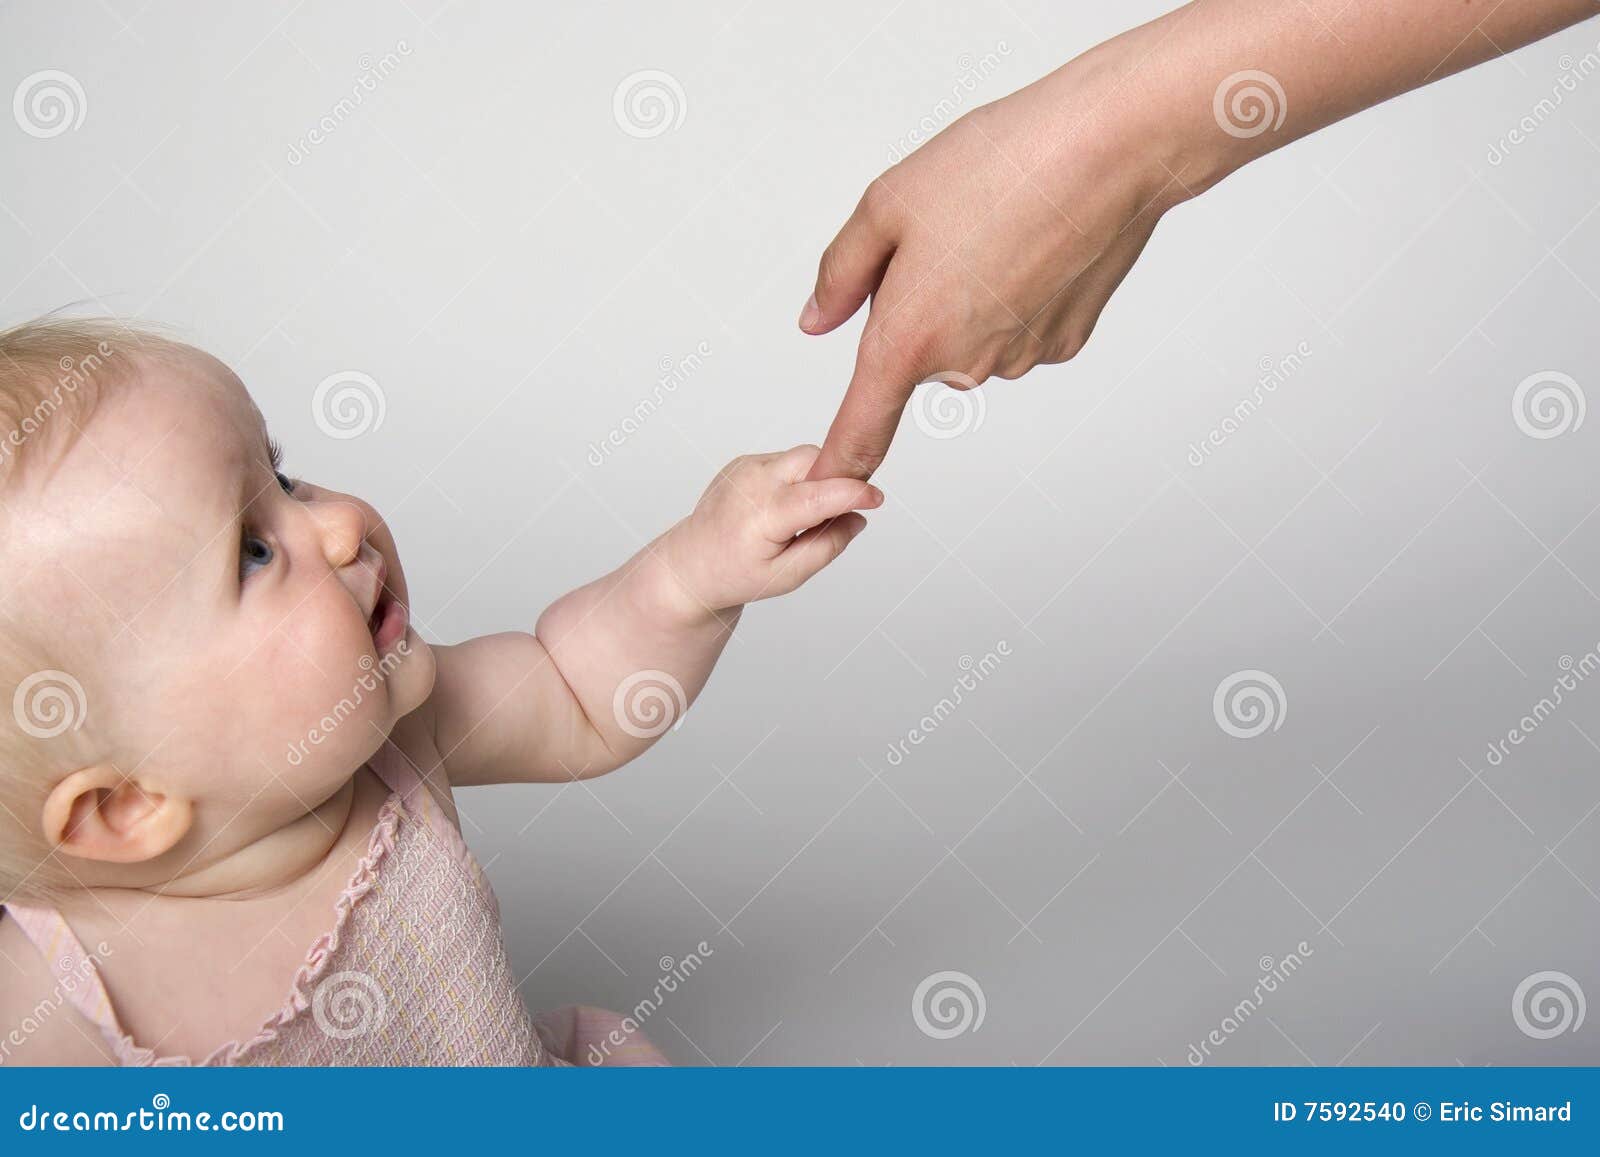 Baby Reaching stock photo. Image of sparse, uncluttered ...